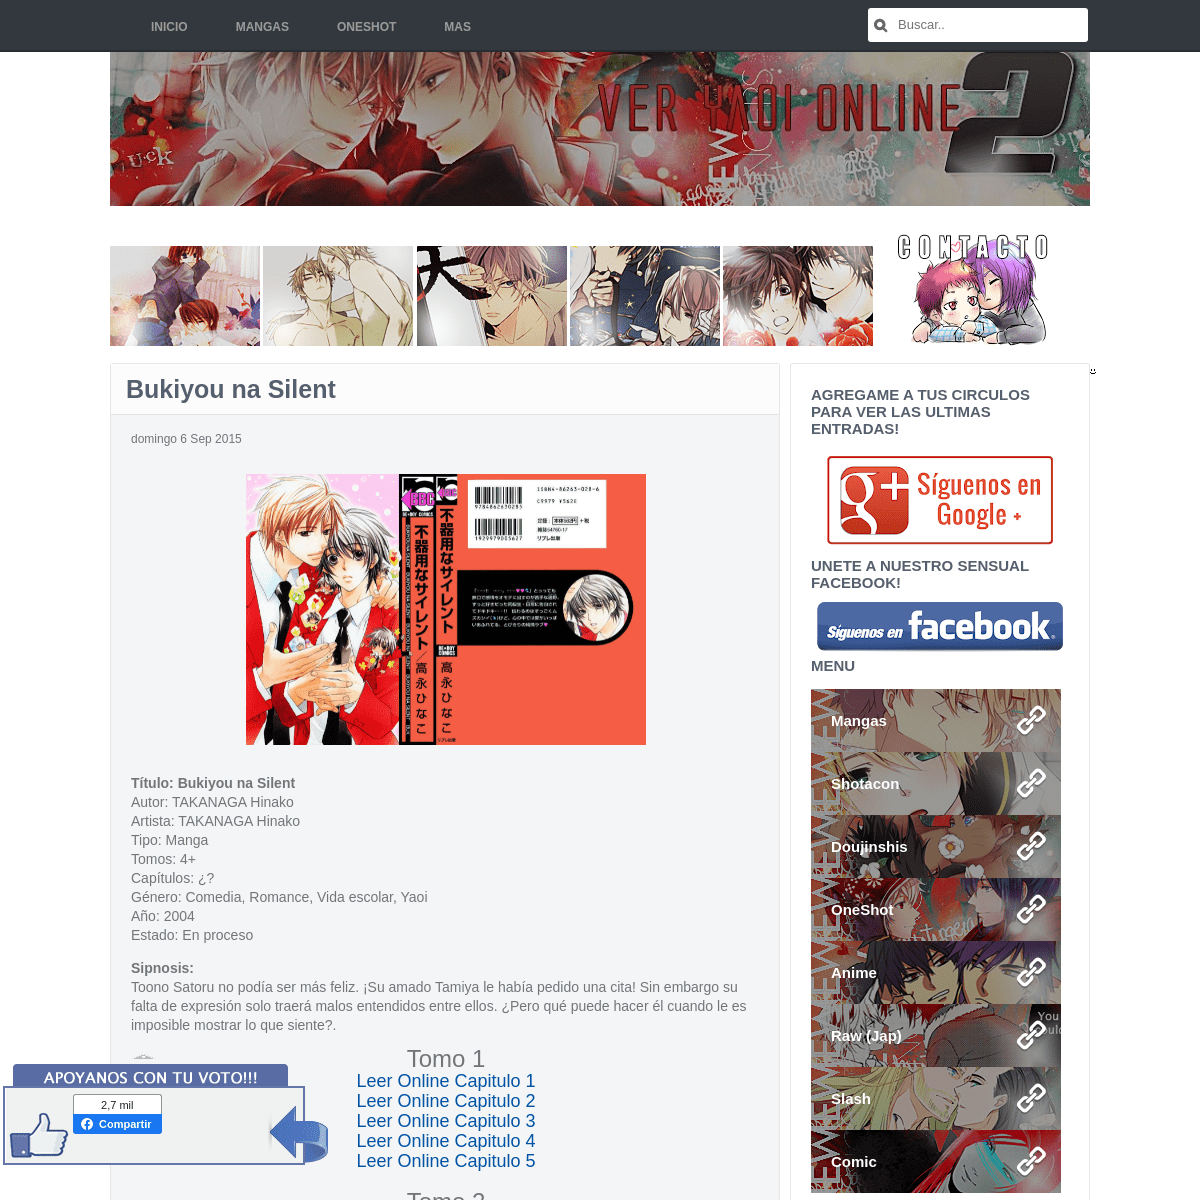 A complete backup of http://veryaoionline.net/2015/09/bukiyou-na-silent.html